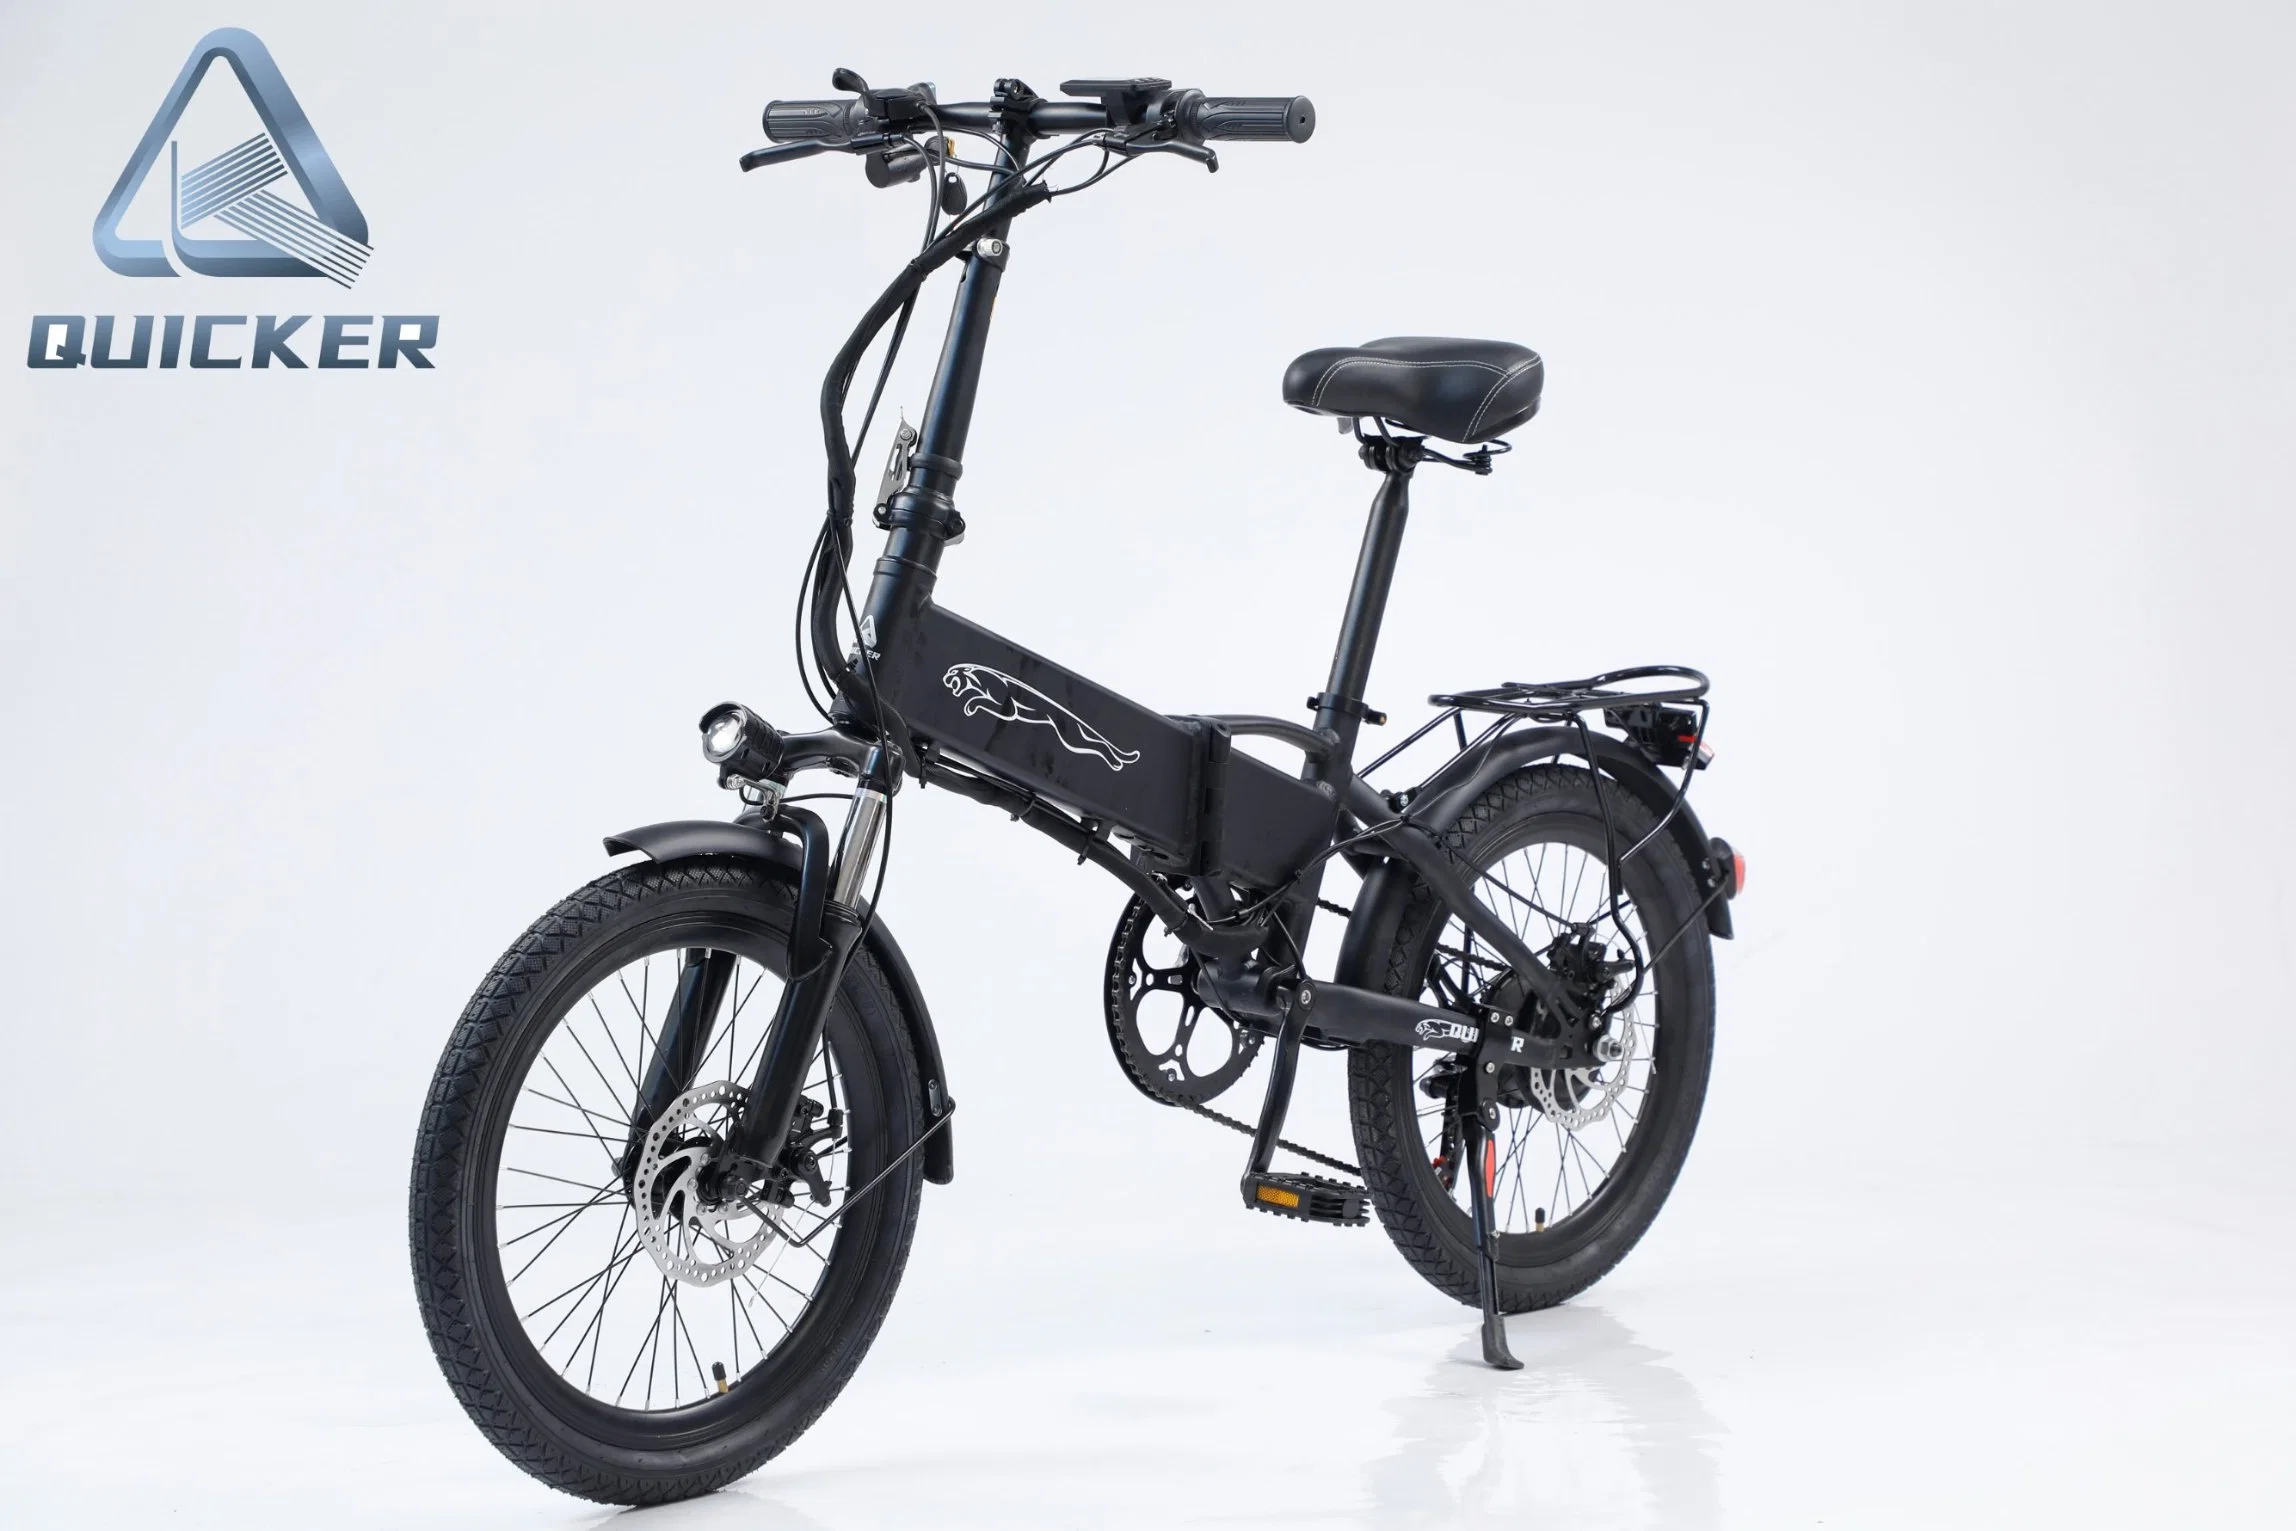 Top Selling 350W 500watts Vintage Ebike with EEC/CE Certificate Retro Style Electric Bike 36V/48V Lithium Battery 26" Fat Tire